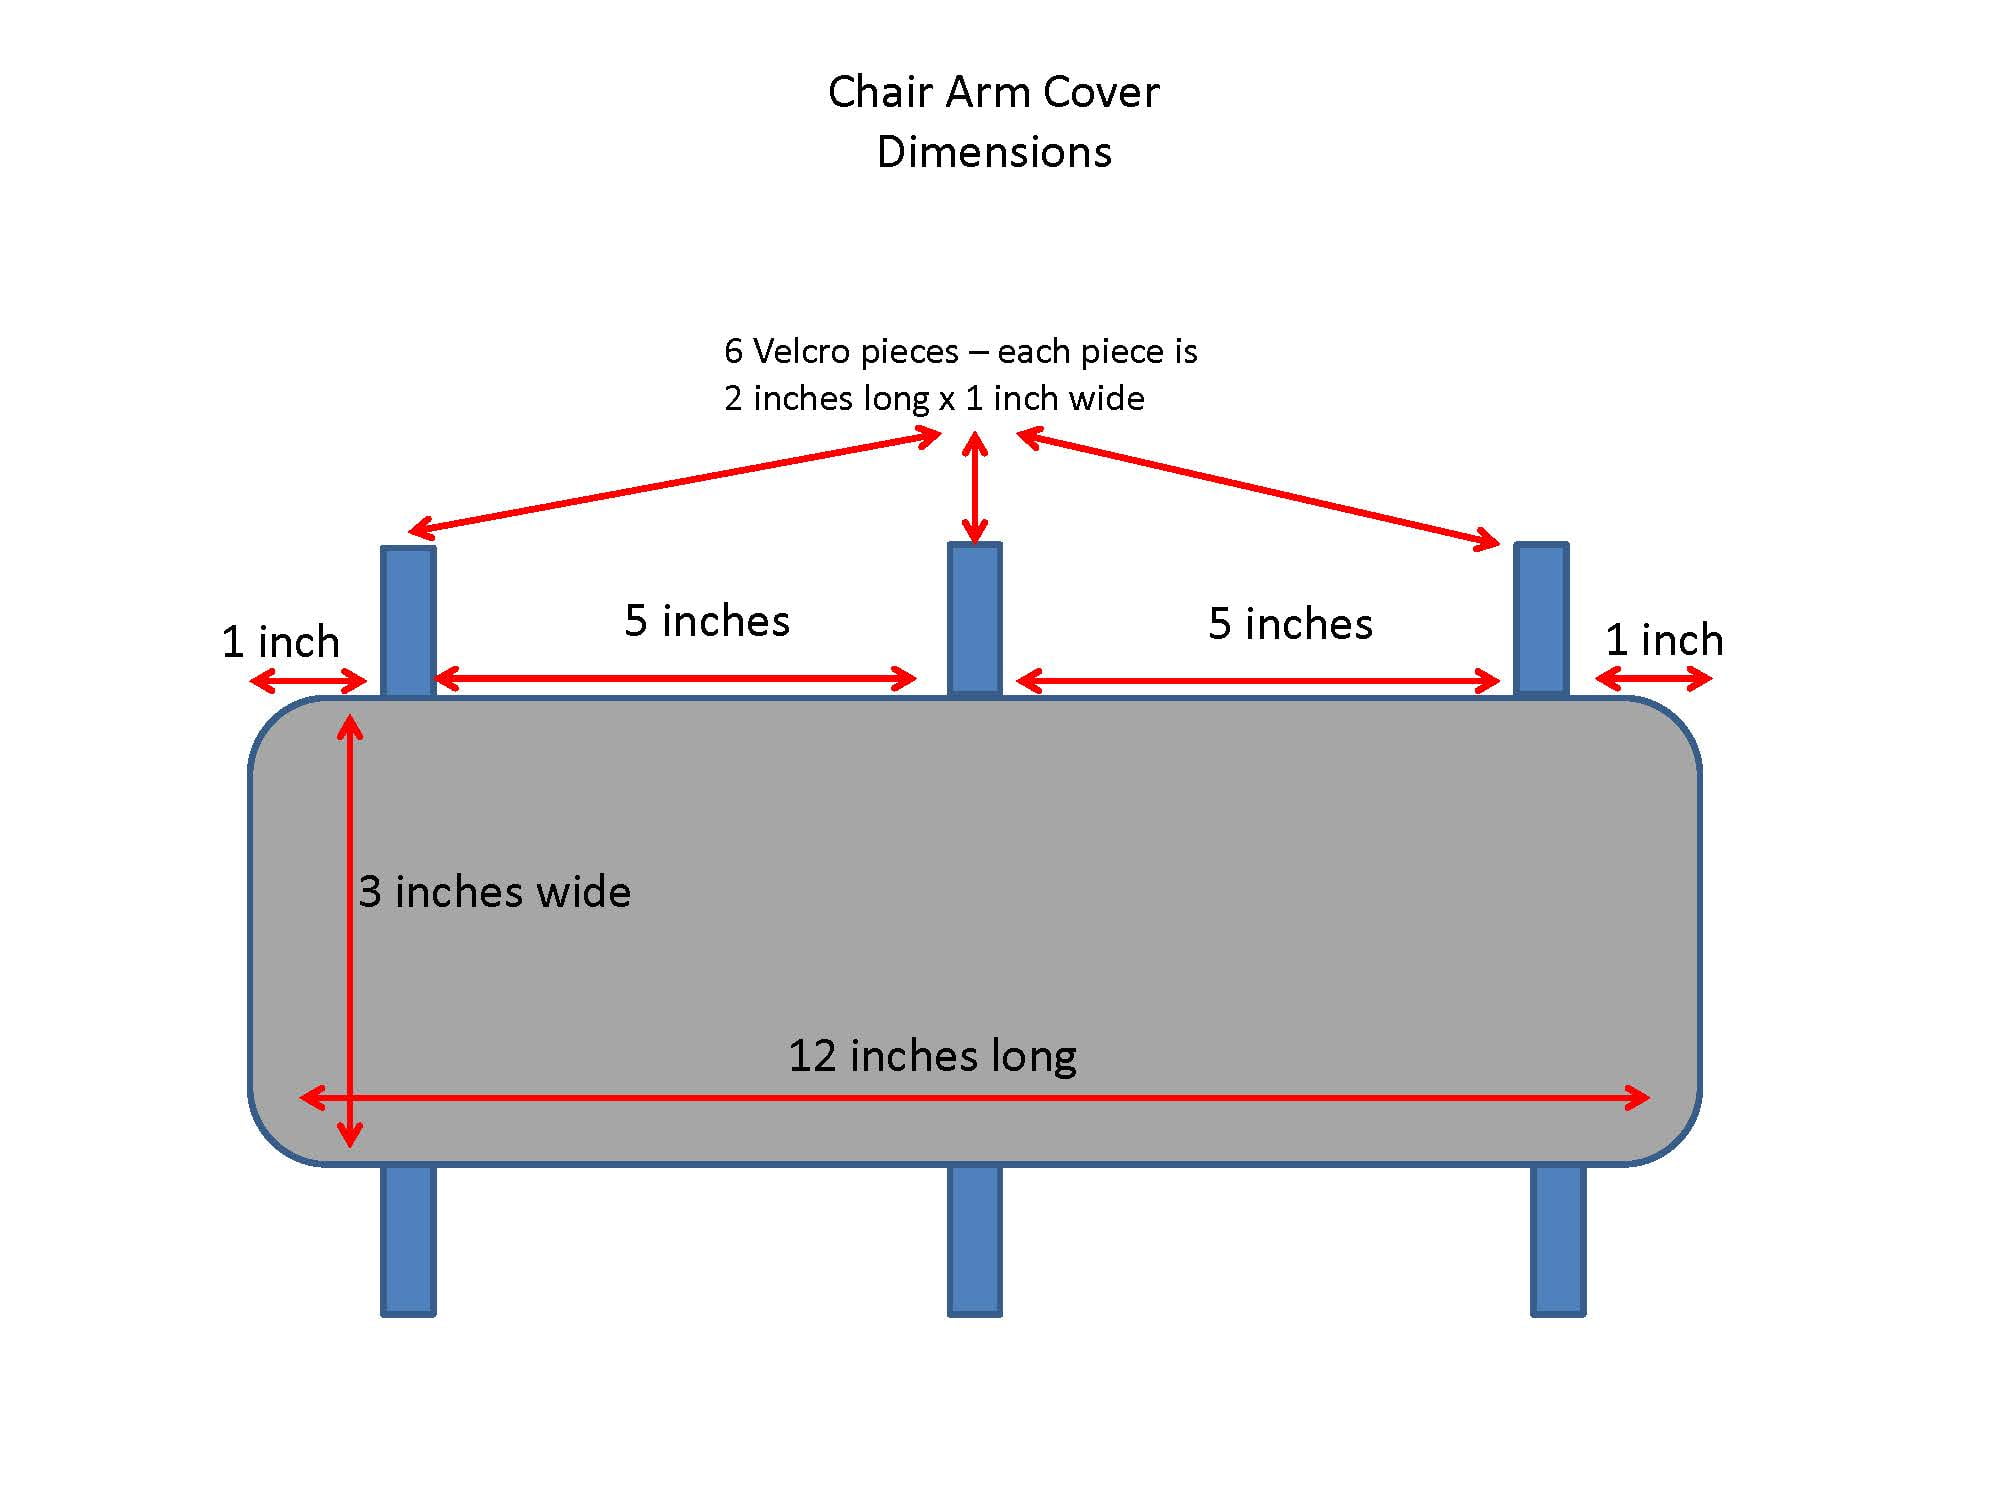 Chair Arm Cover - Camouflage (2) covers